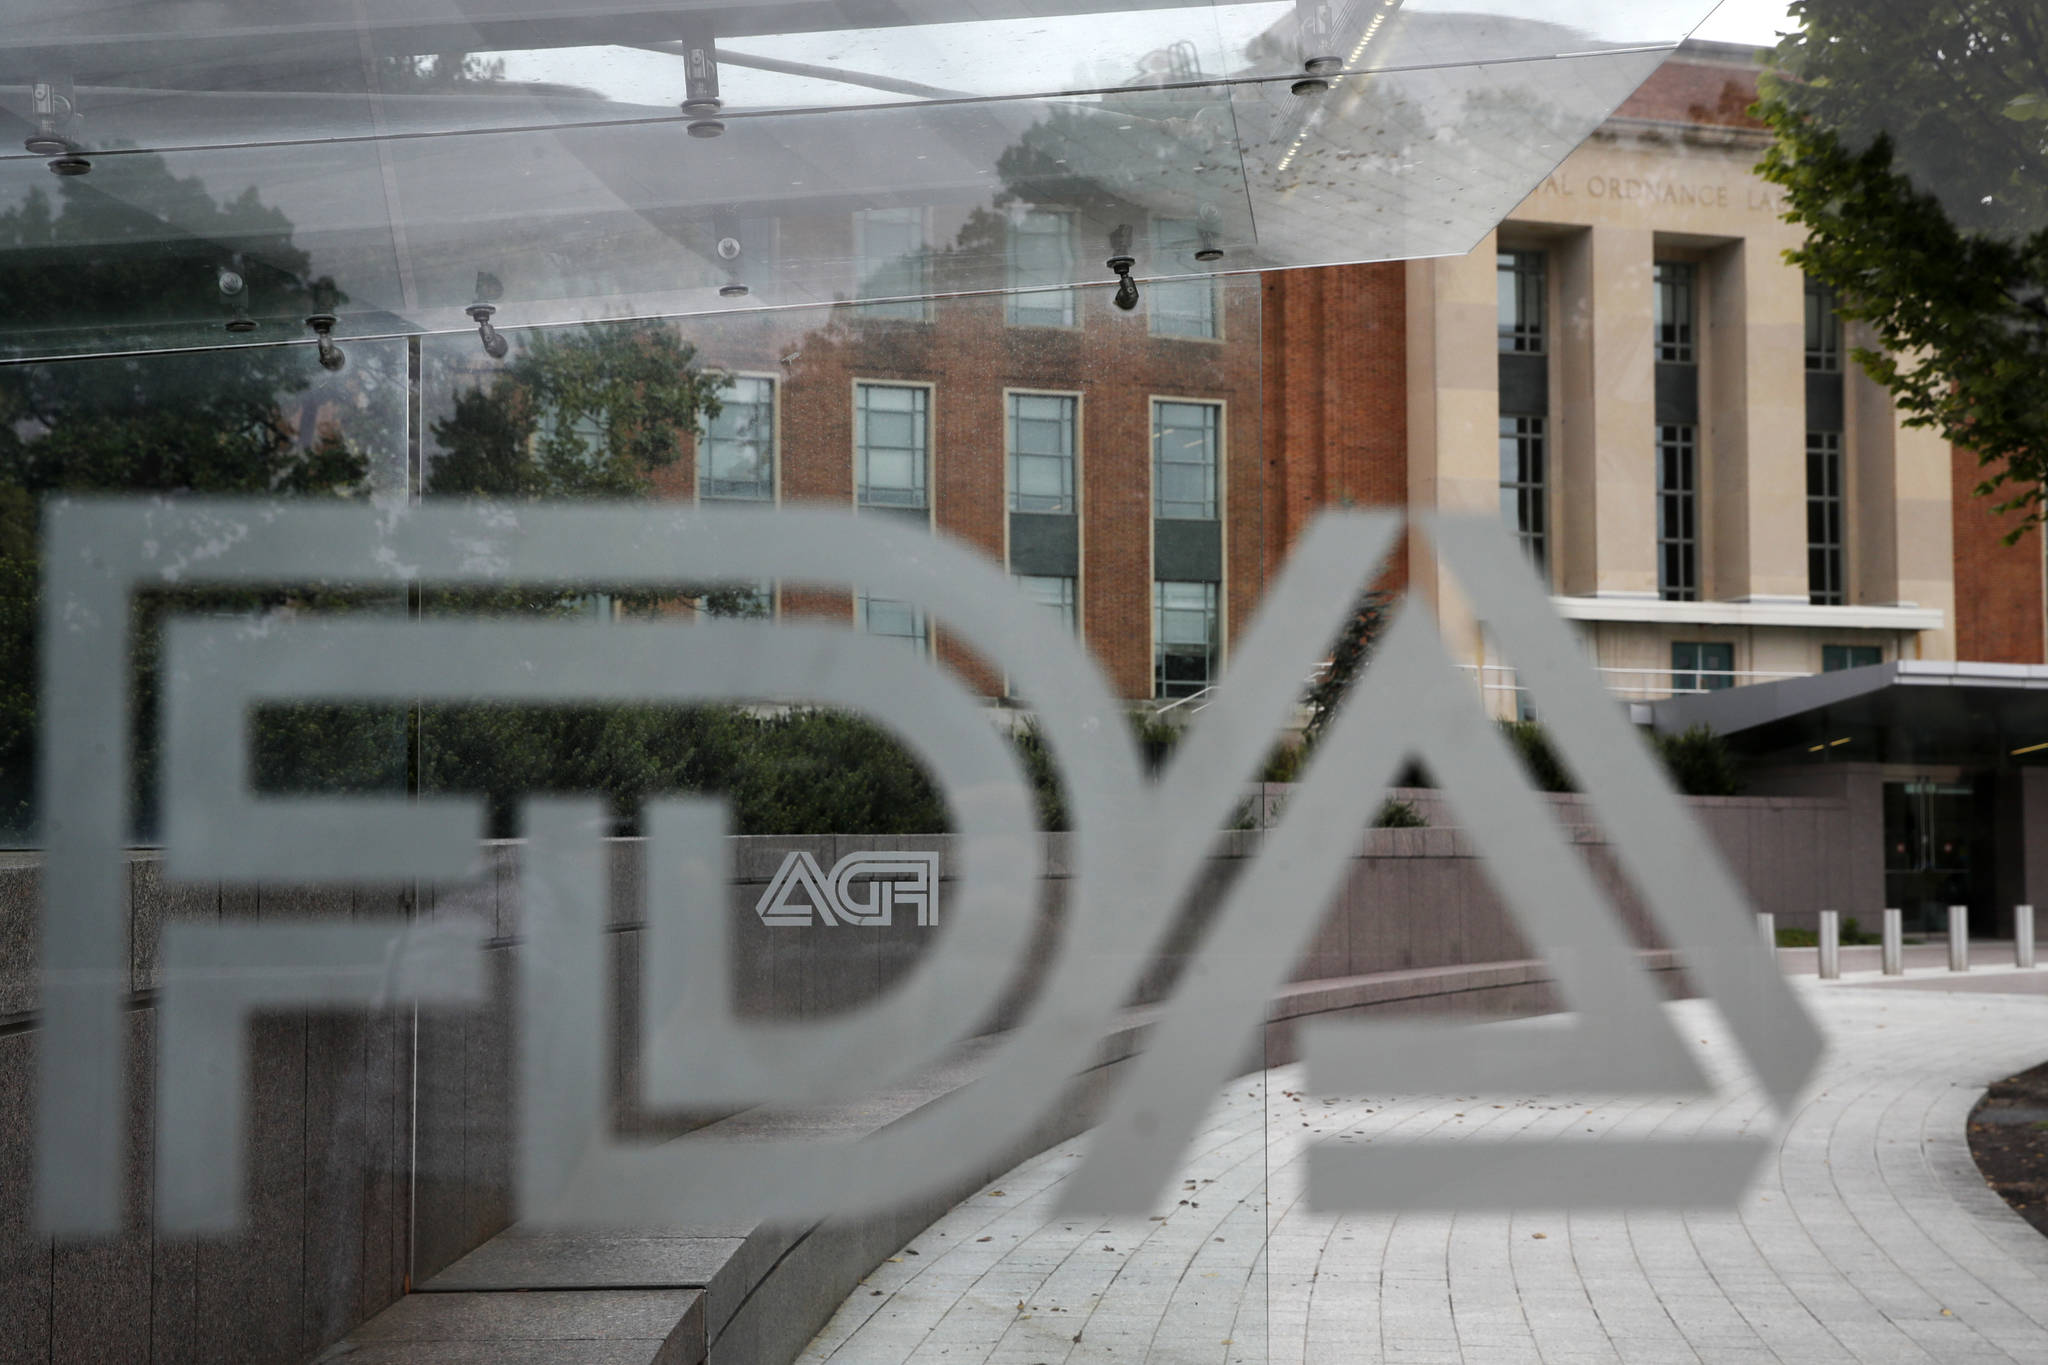 This photo shows the U.S. Food and Drug Administration building behind FDA logos at a bus stop on the agency’s campus in Silver Spring, Md. U.S. regulators have approved a new type of coronavirus test that administration officials have touted as a key to opening up the country. The Food and Drug Administration on Saturday, May 9, 2020, announced emergency authorization for antigen tests developed by Quidel Corp. of San Diego. The test can rapidly detect fragments of virus proteins in samples collected from swabs inside the nasal cavity, the FDA said in a statement. (AP Photo/Jacquelyn Martin, File)